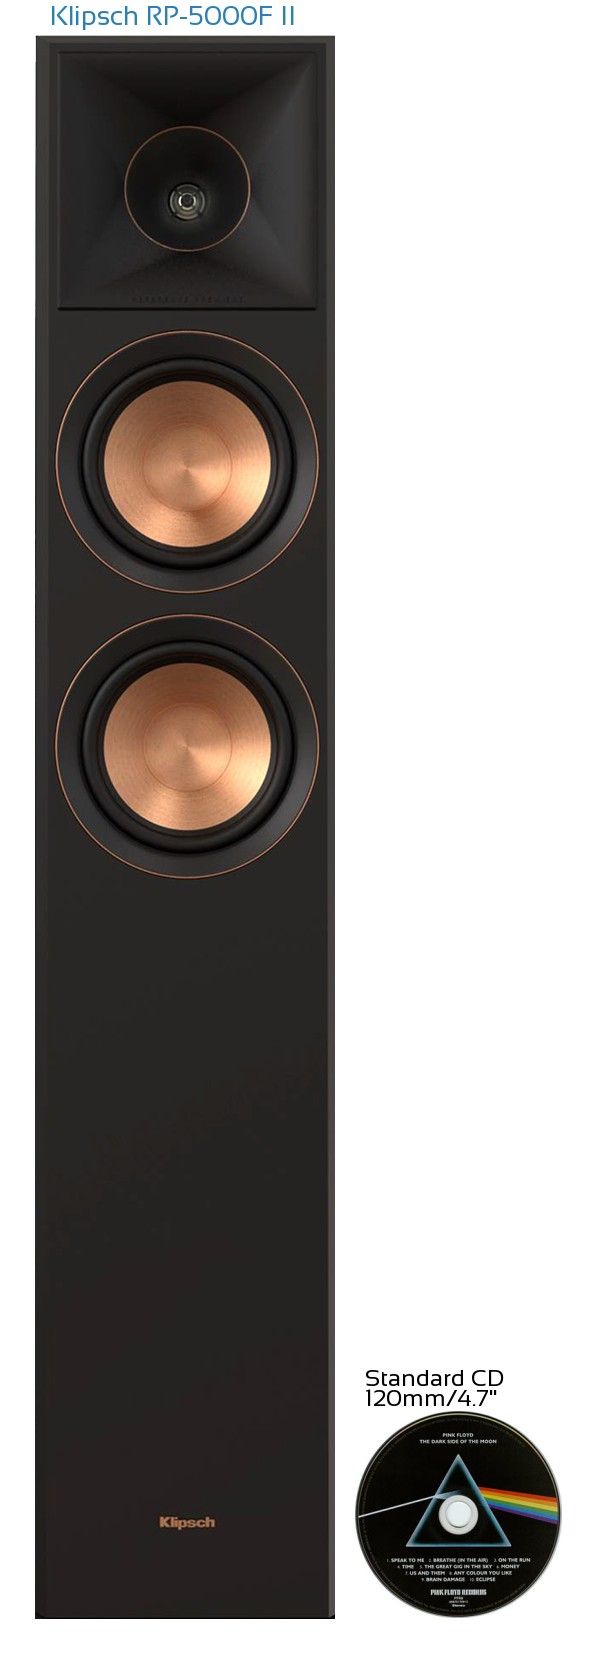 Klipsch RP-5000F II Real Life Body Size Comparison